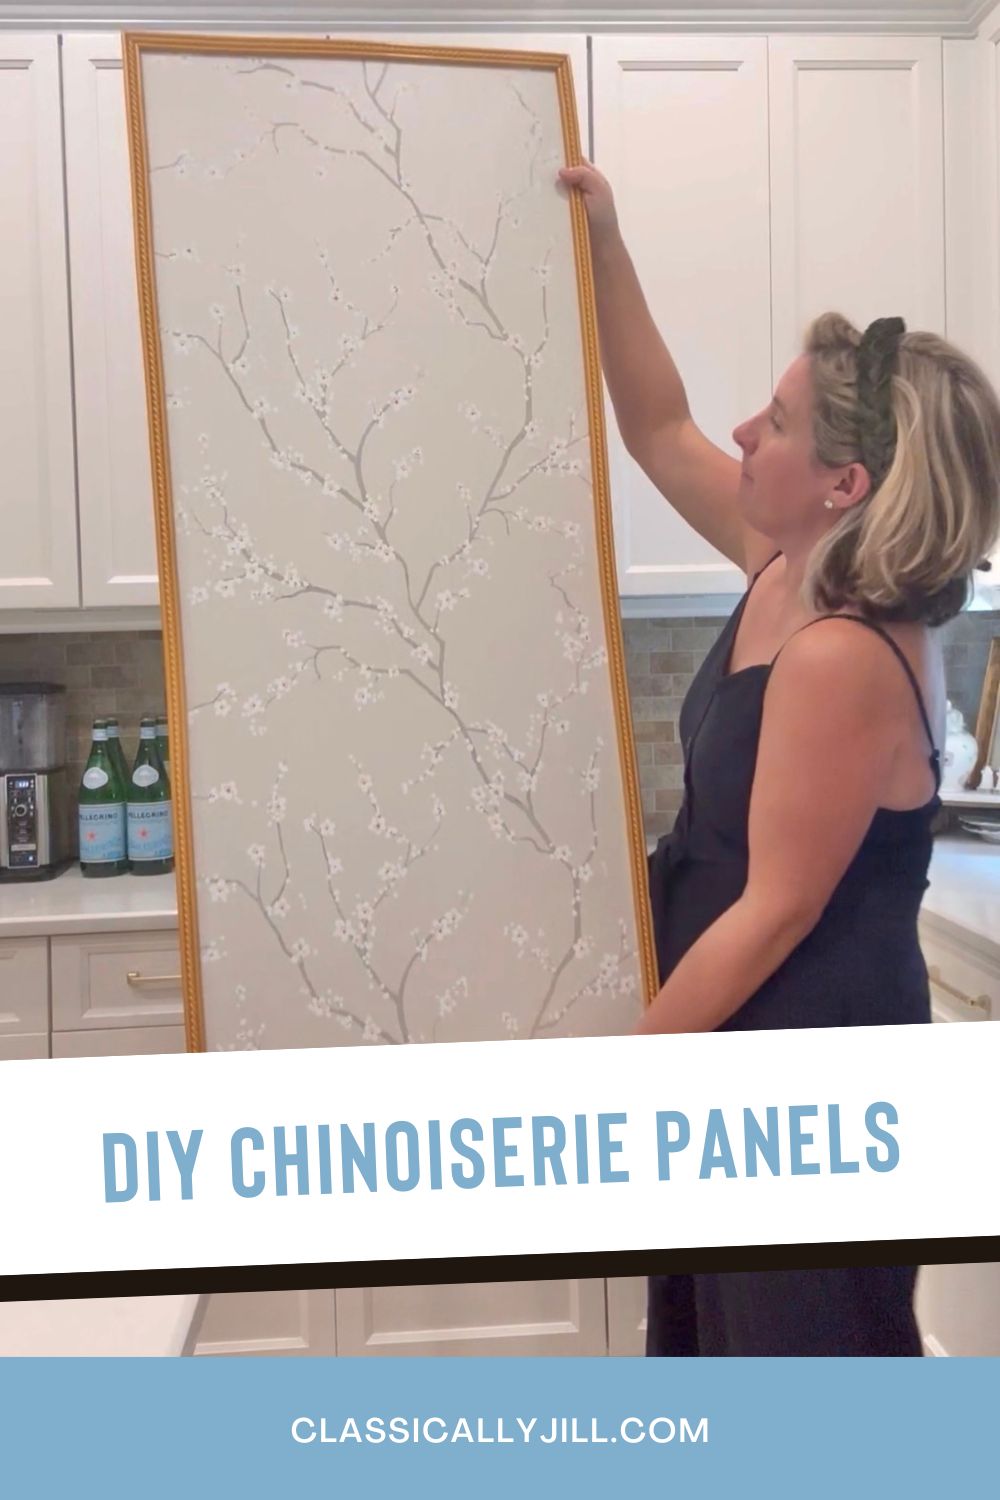 DIY Chinoiserie Panels | The Easiest Way to Make Your Own Chinoiserie Panels